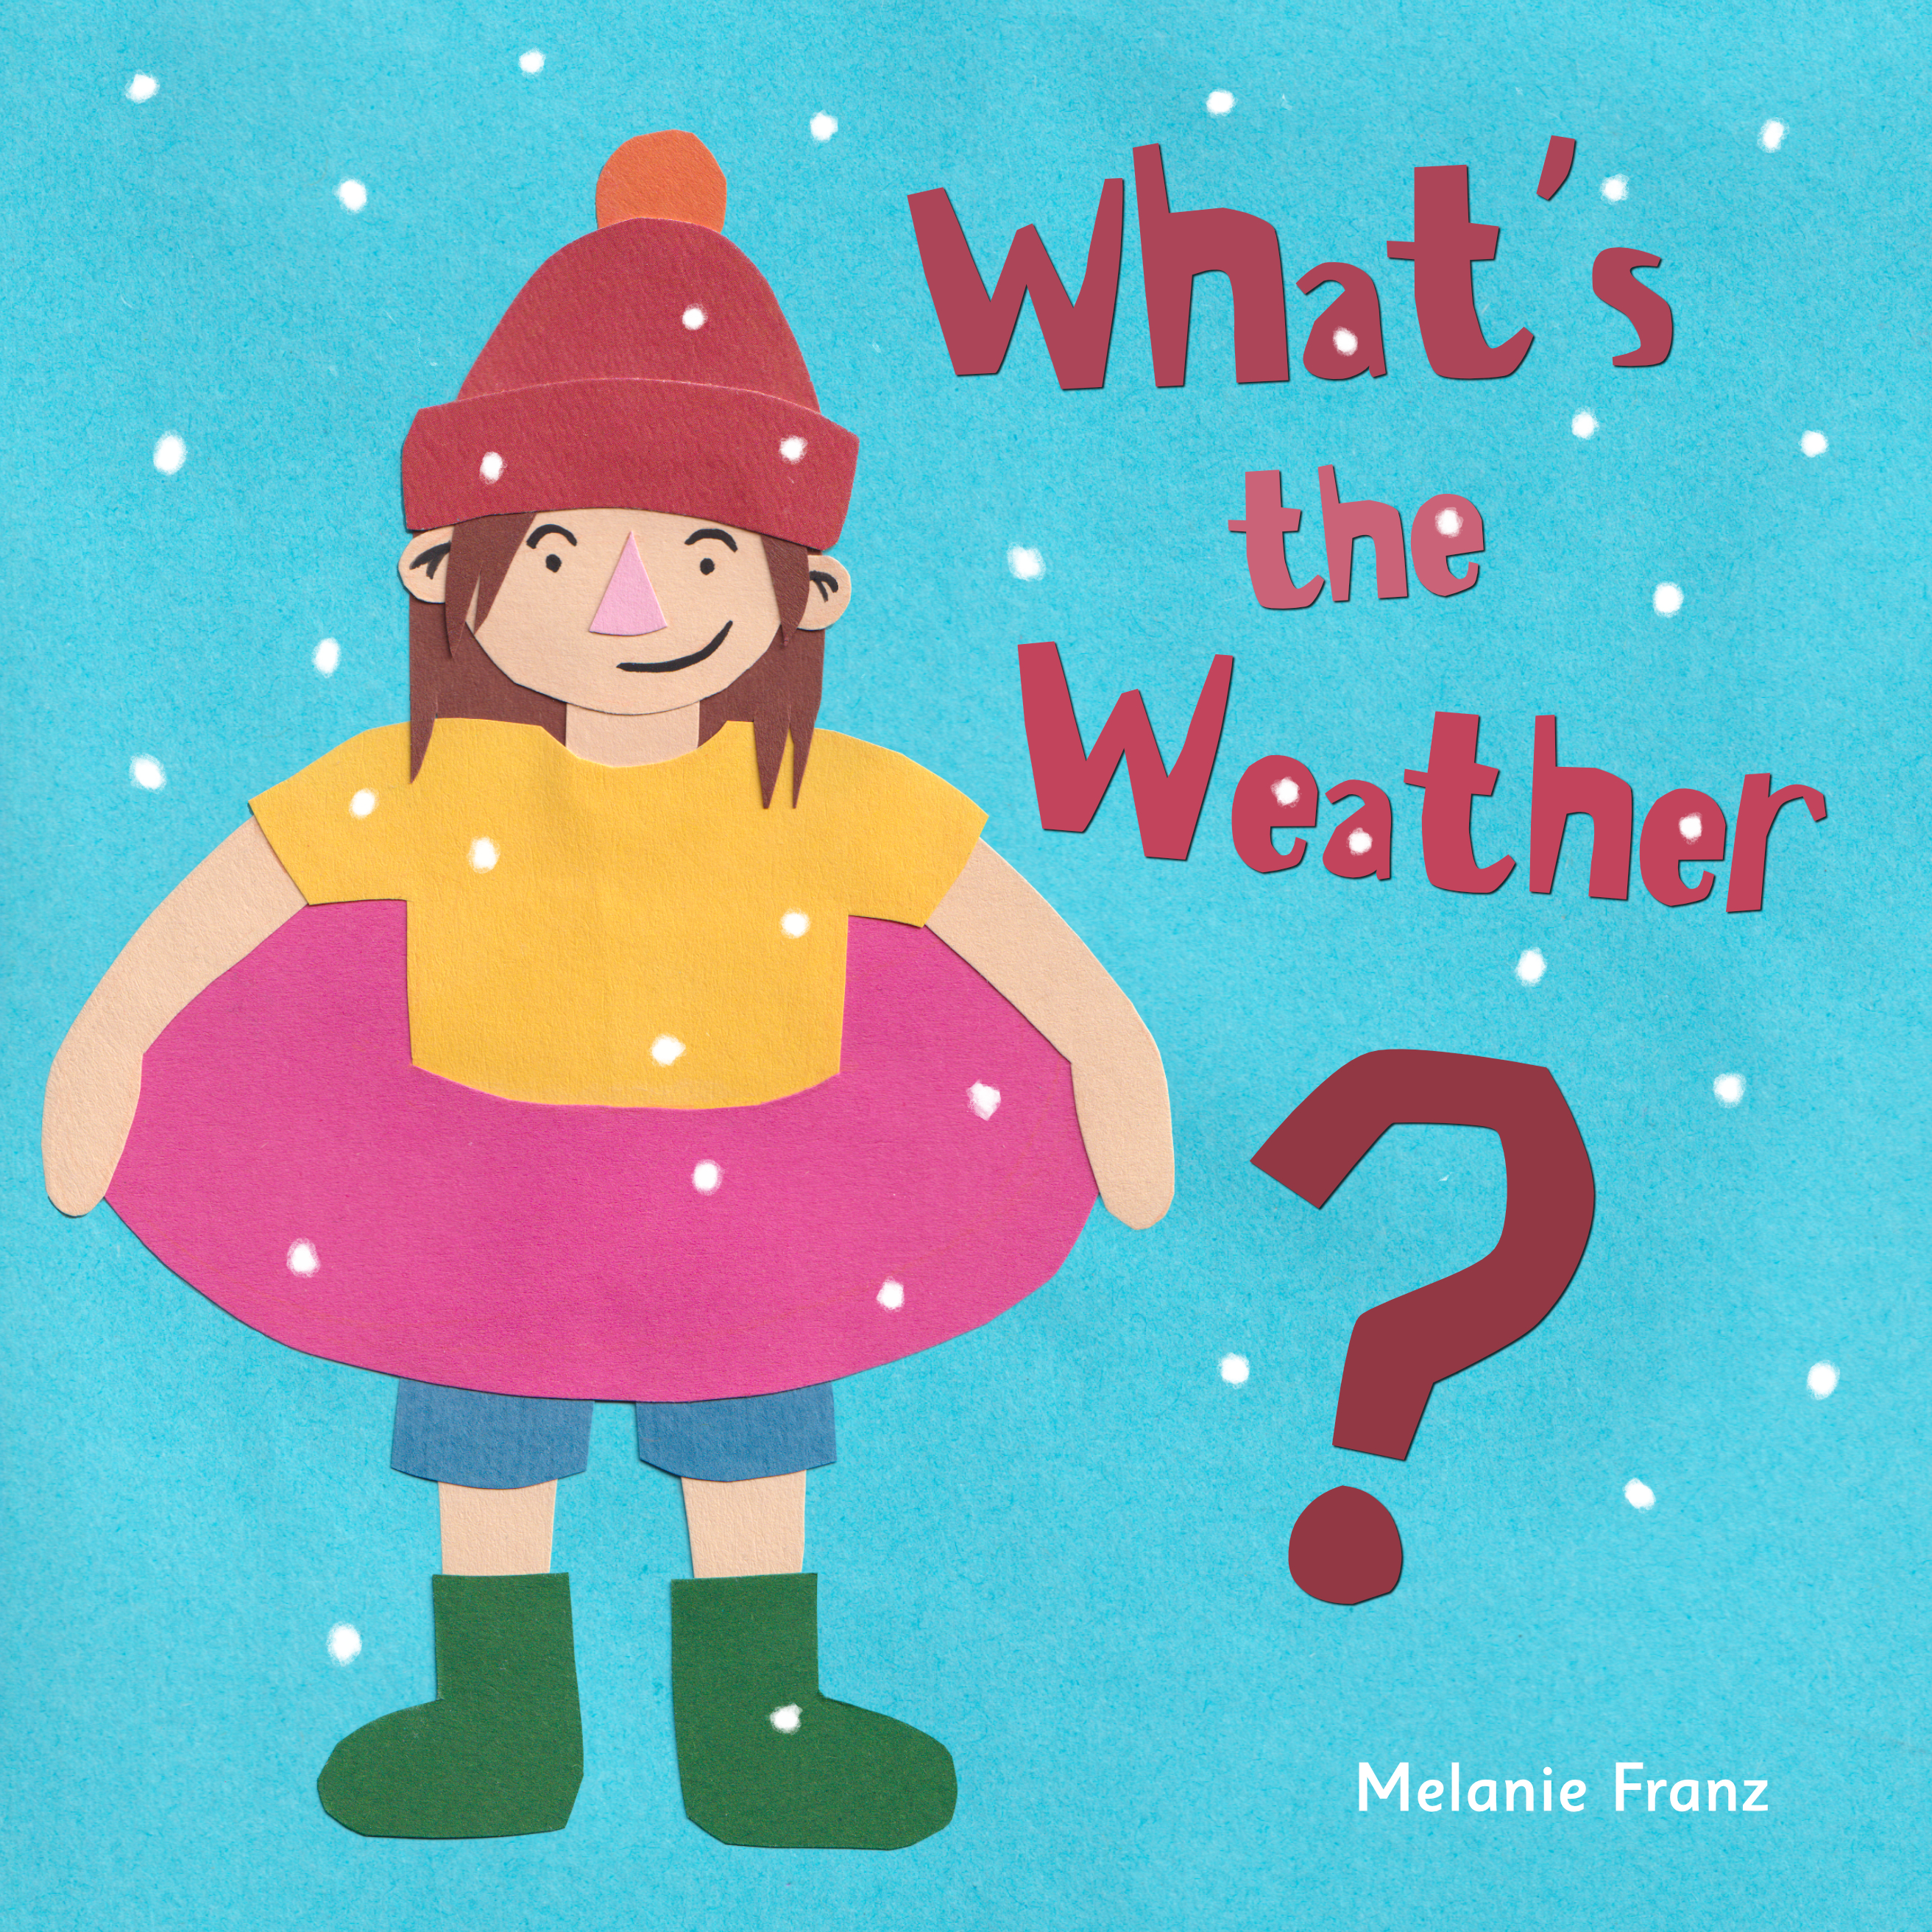 What's the weather cover new with snow_Melanie Franz